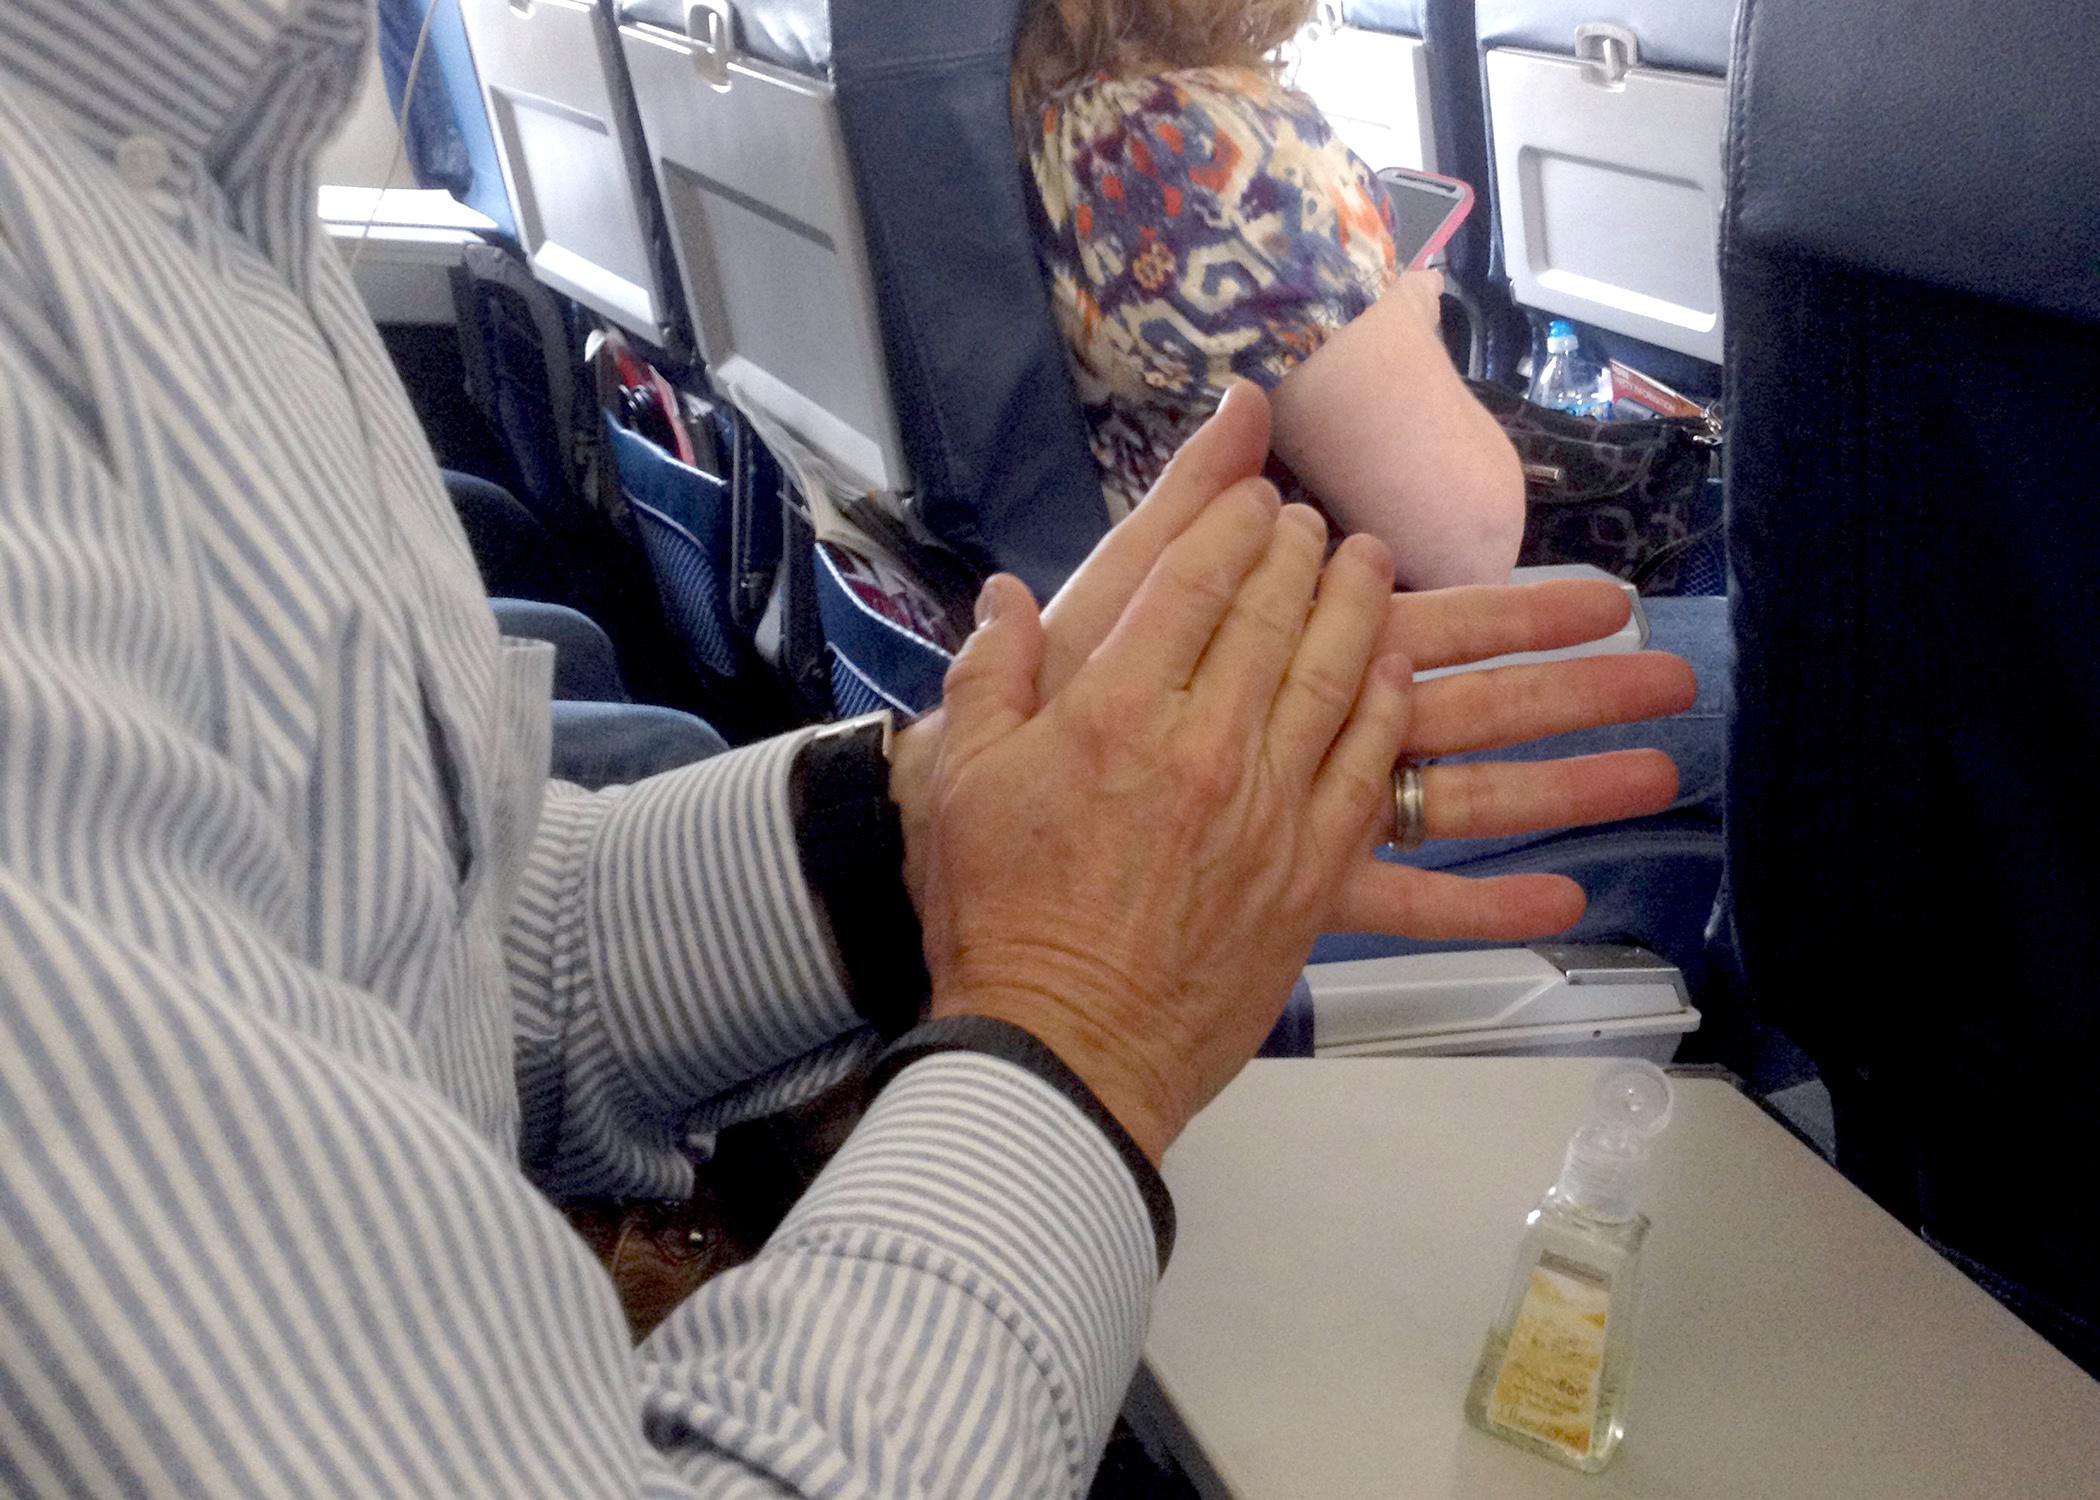 man washing hands with alcohol-based rub seated in airplane.